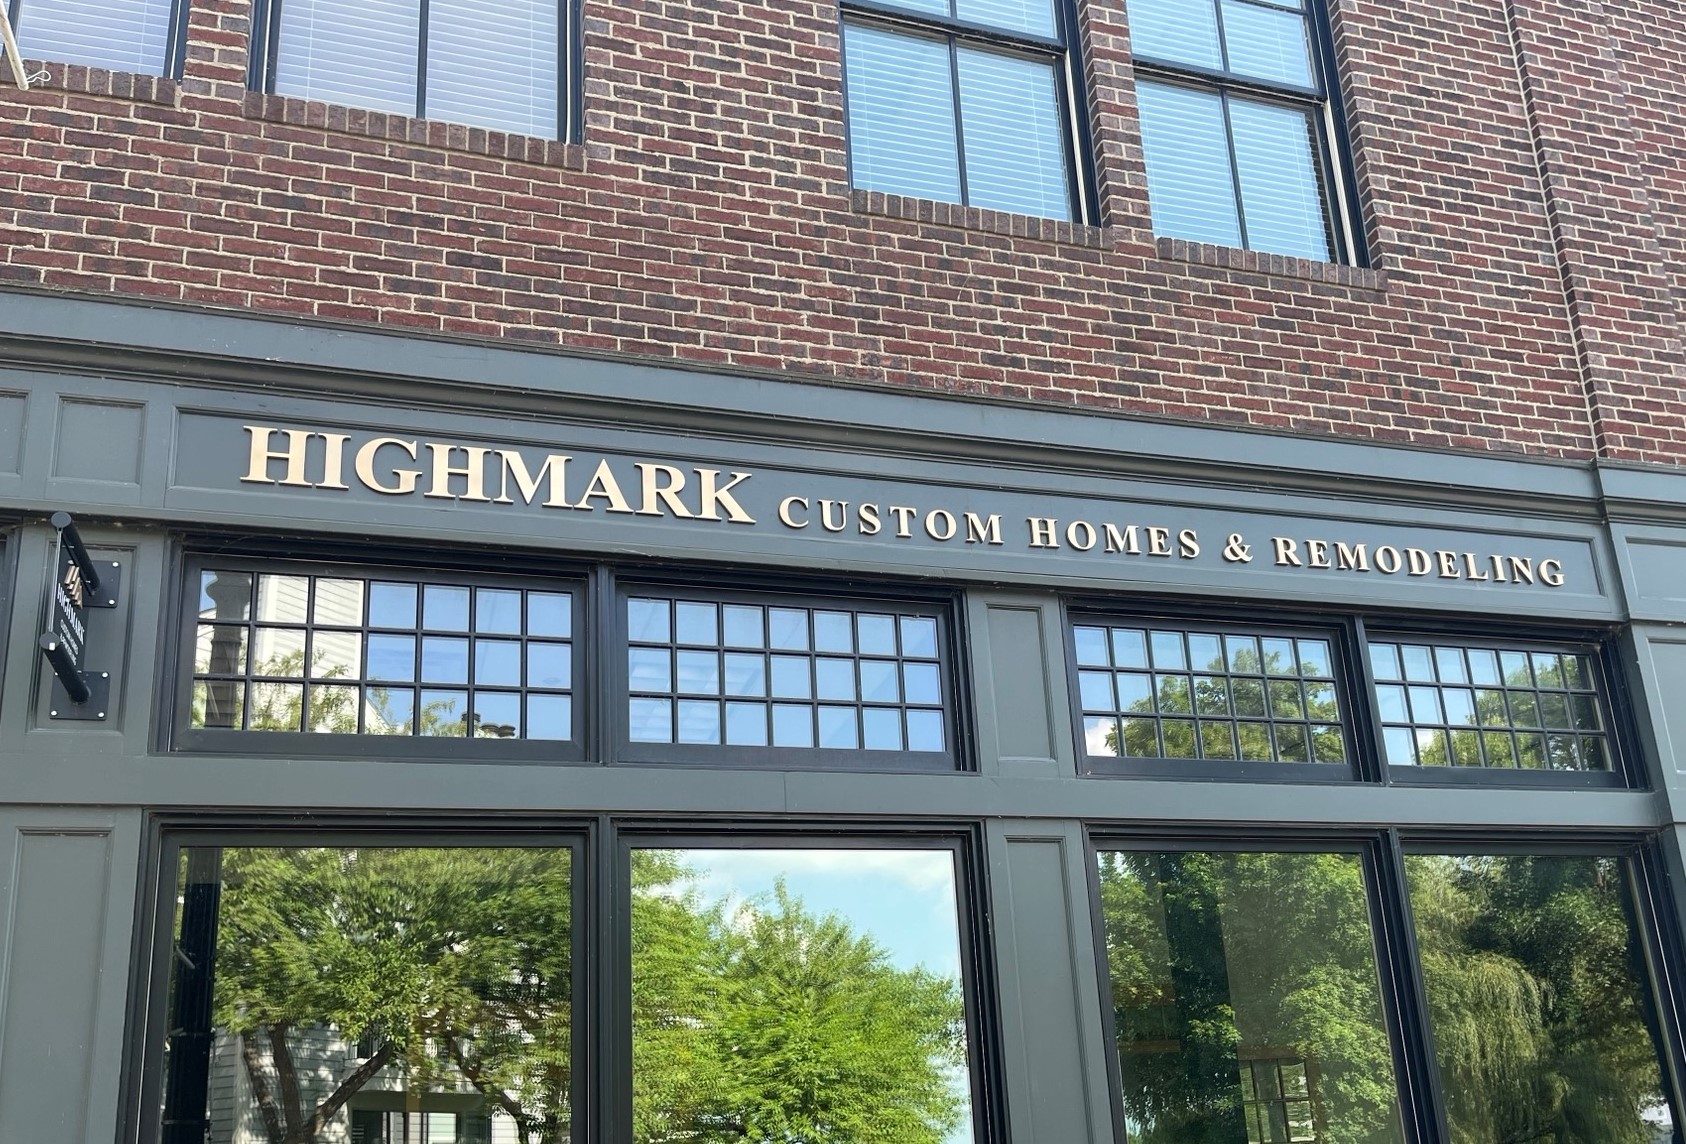 A building with a sign that says Highmark Custom Homes and Remodeling, located in The Ranch.